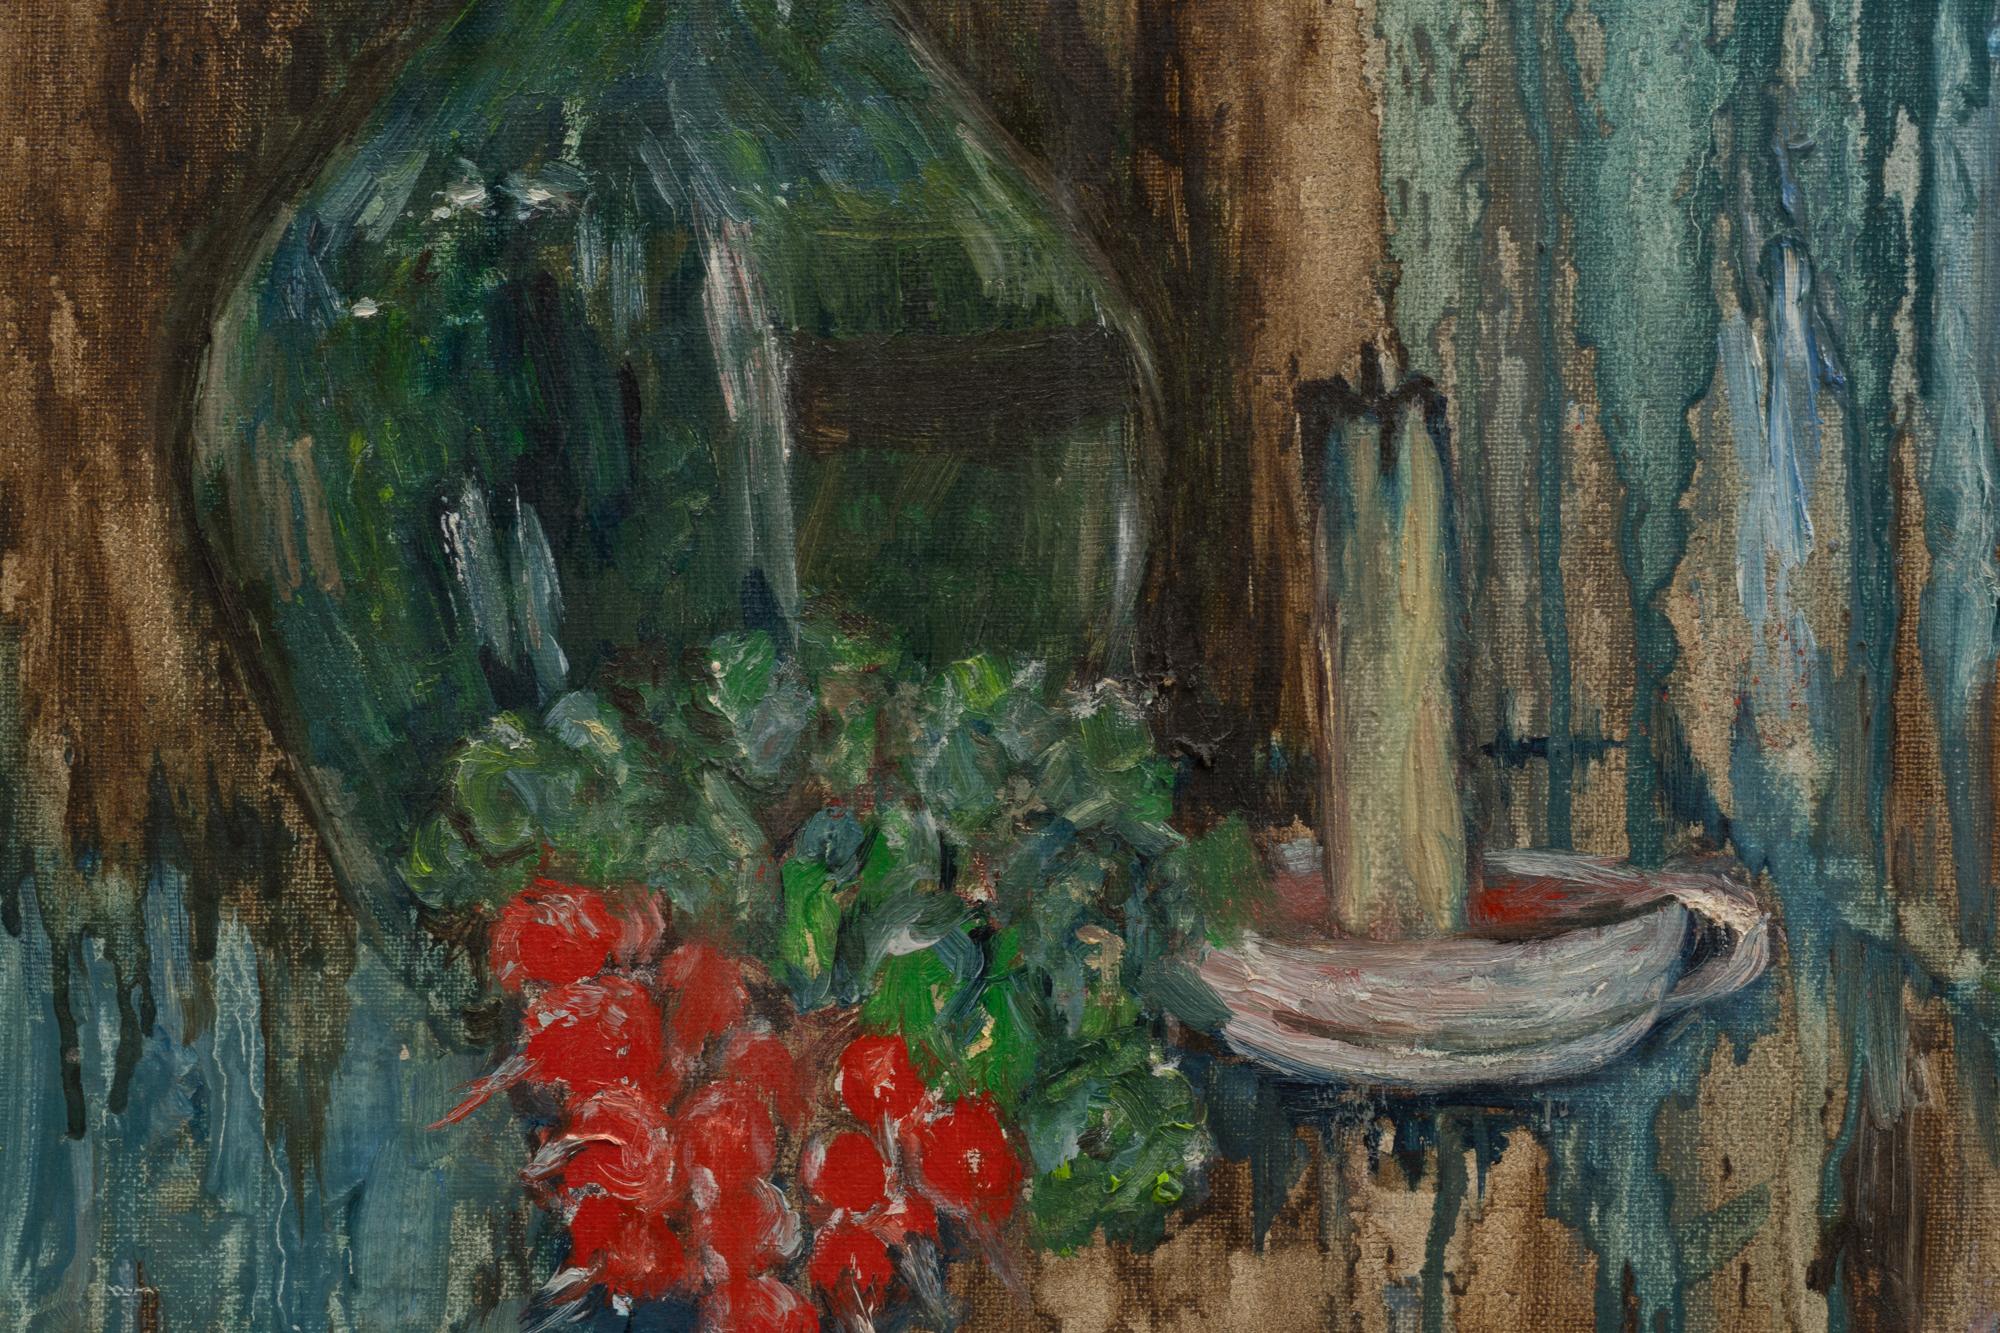 This captivating 20th Century French artwork is a study in contrasts, blending rustic textures with delicate details. The piece features a weathered backdrop, on which sits a translucent green bottle and a small, candle holder, seemingly abandoned